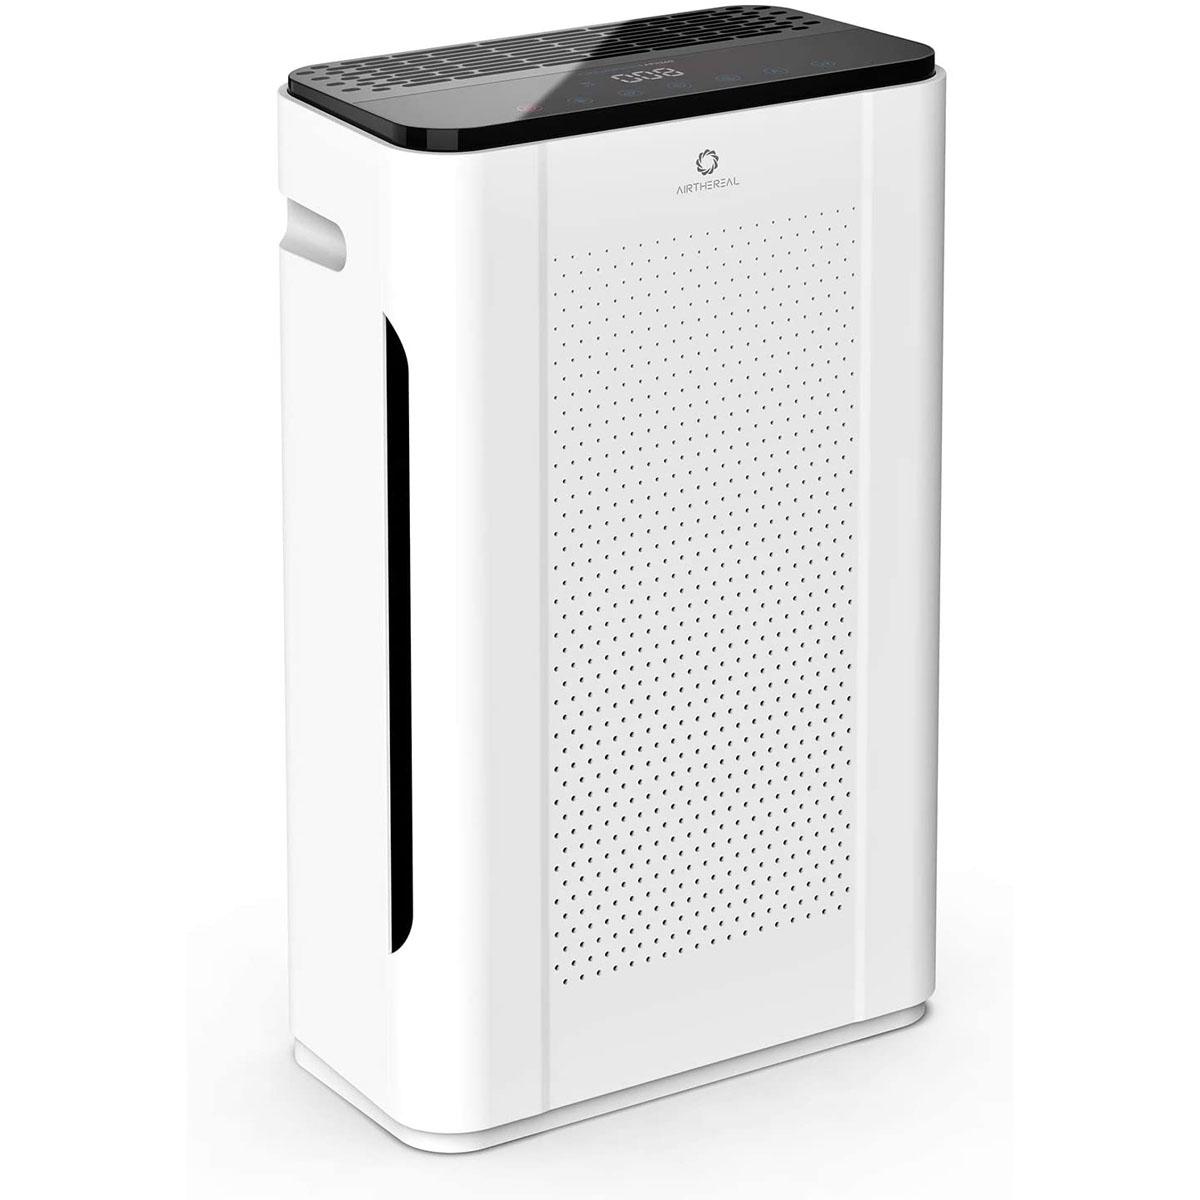 Airthereal APH260 HEPA Filter Air Purifier for $91.52 Shipped